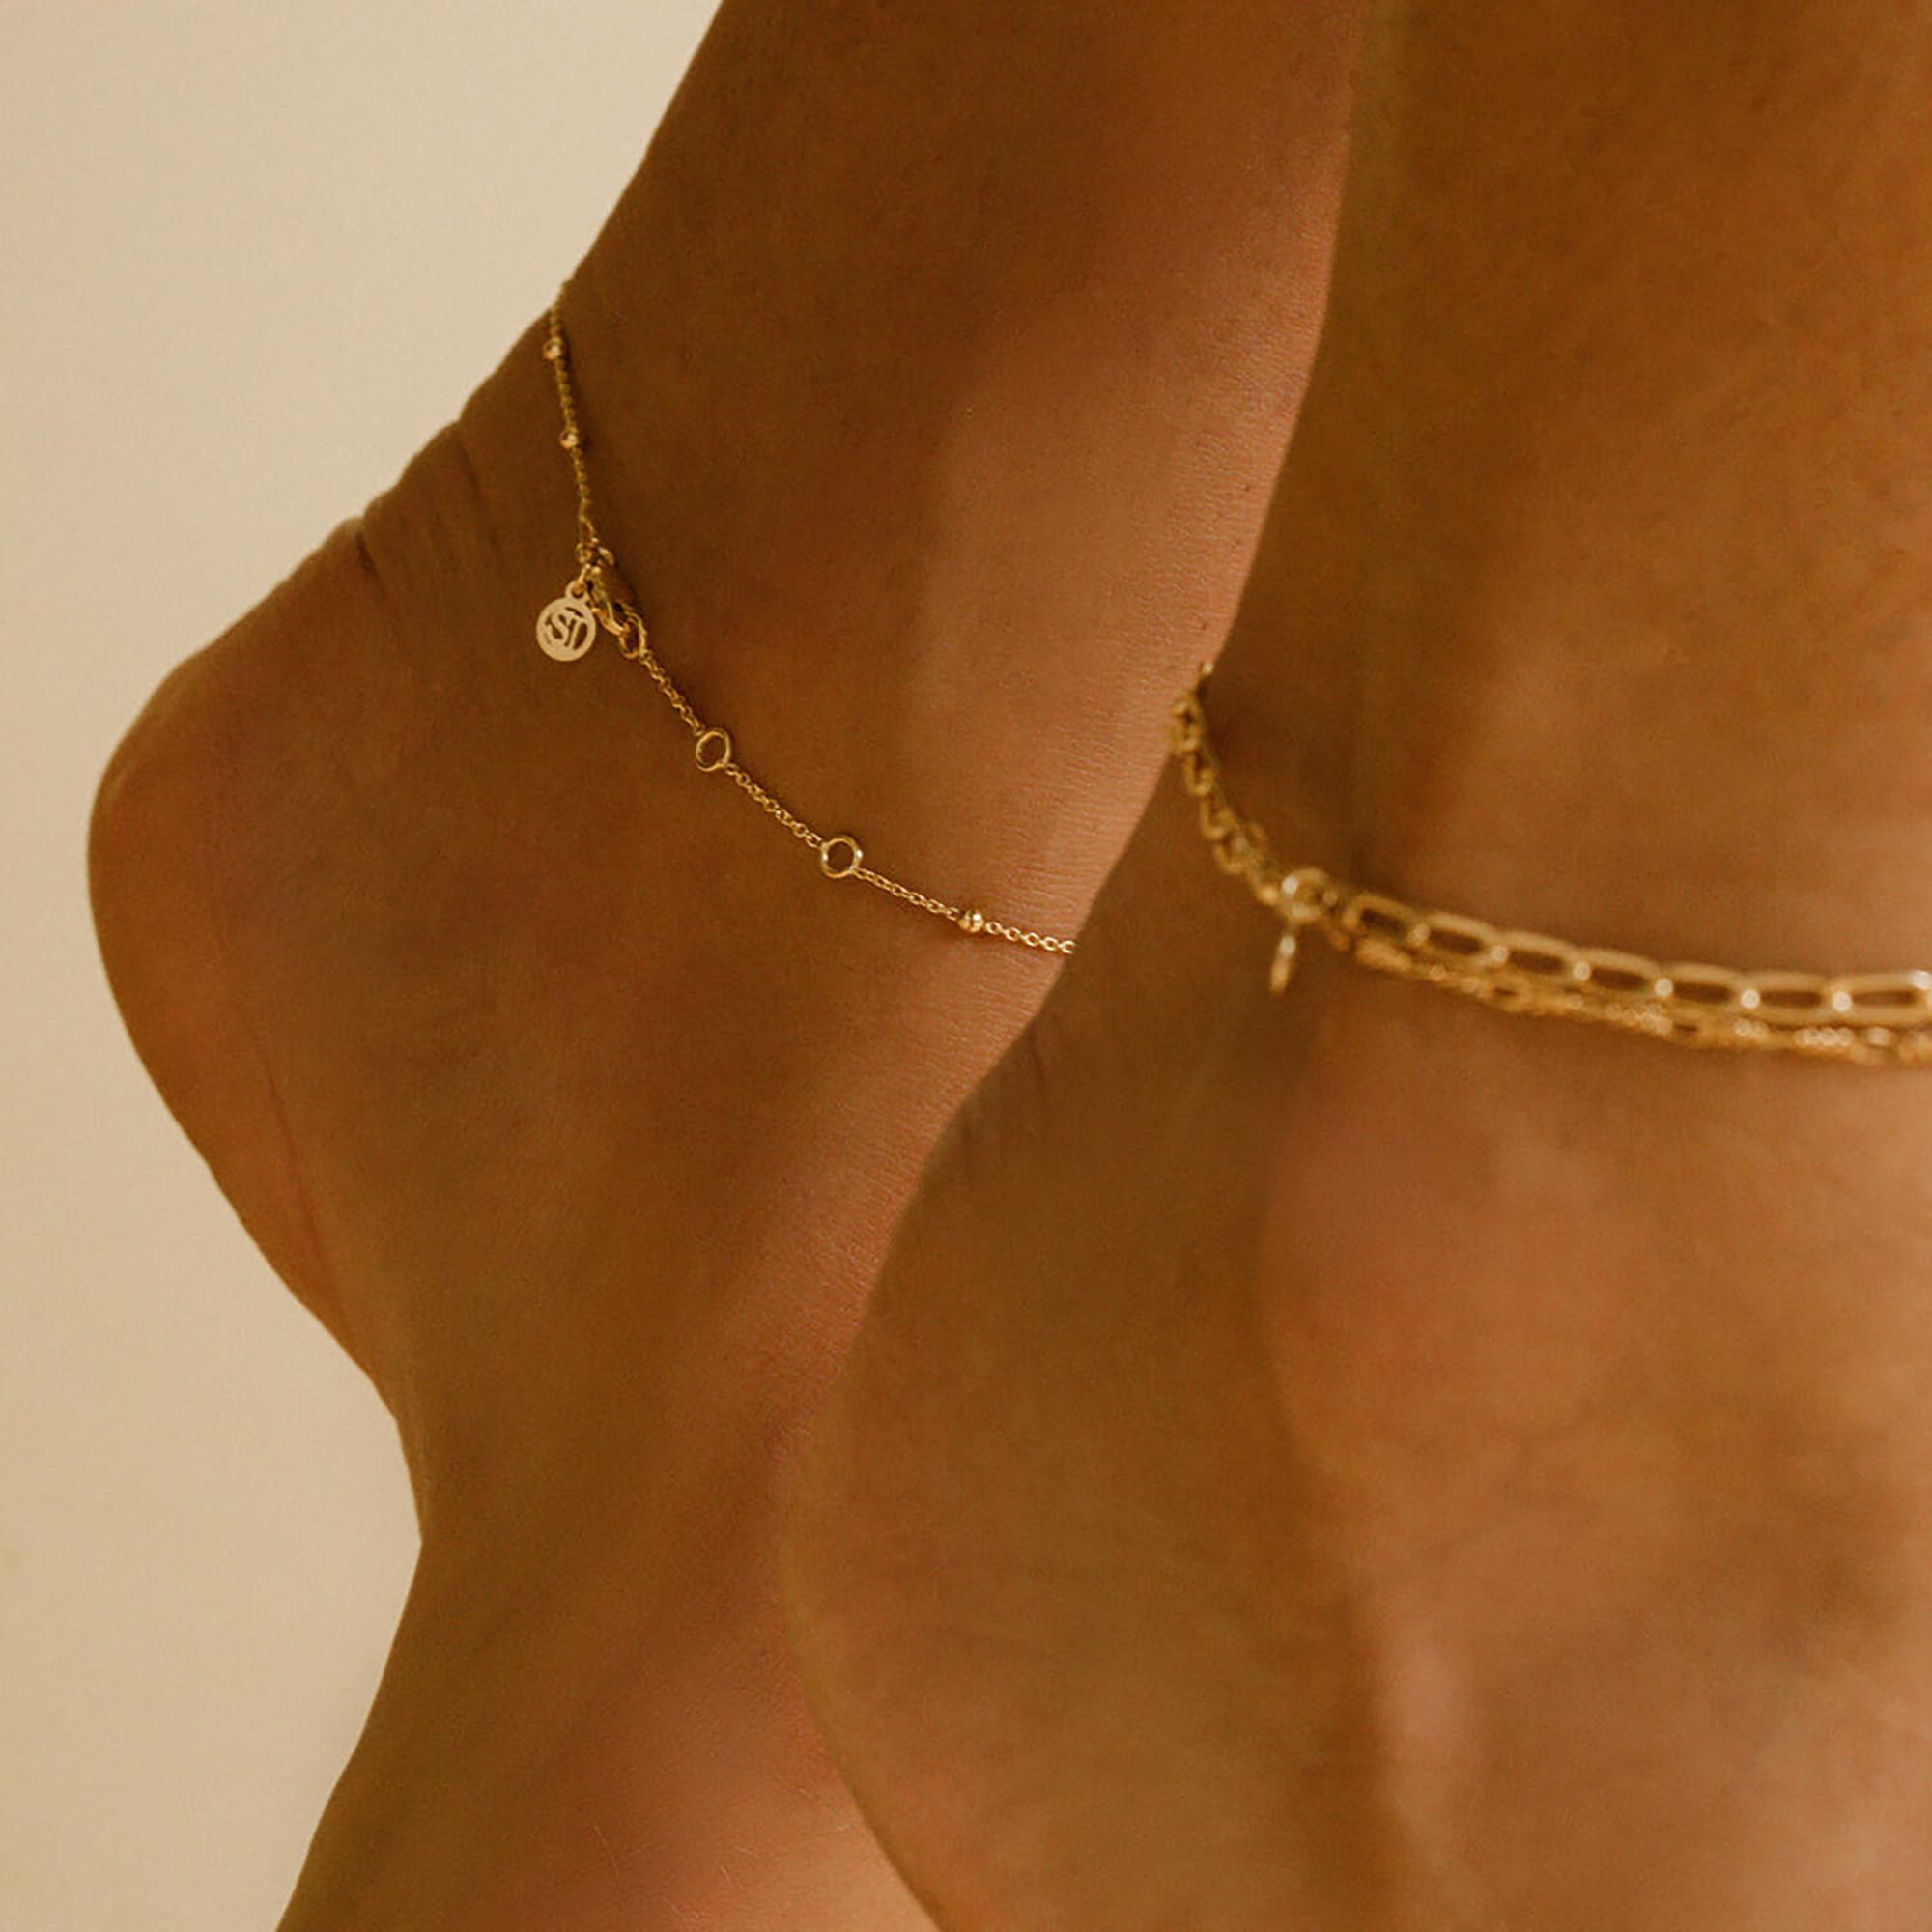 Sif Jakobs Ankle Chain Cavigliera 